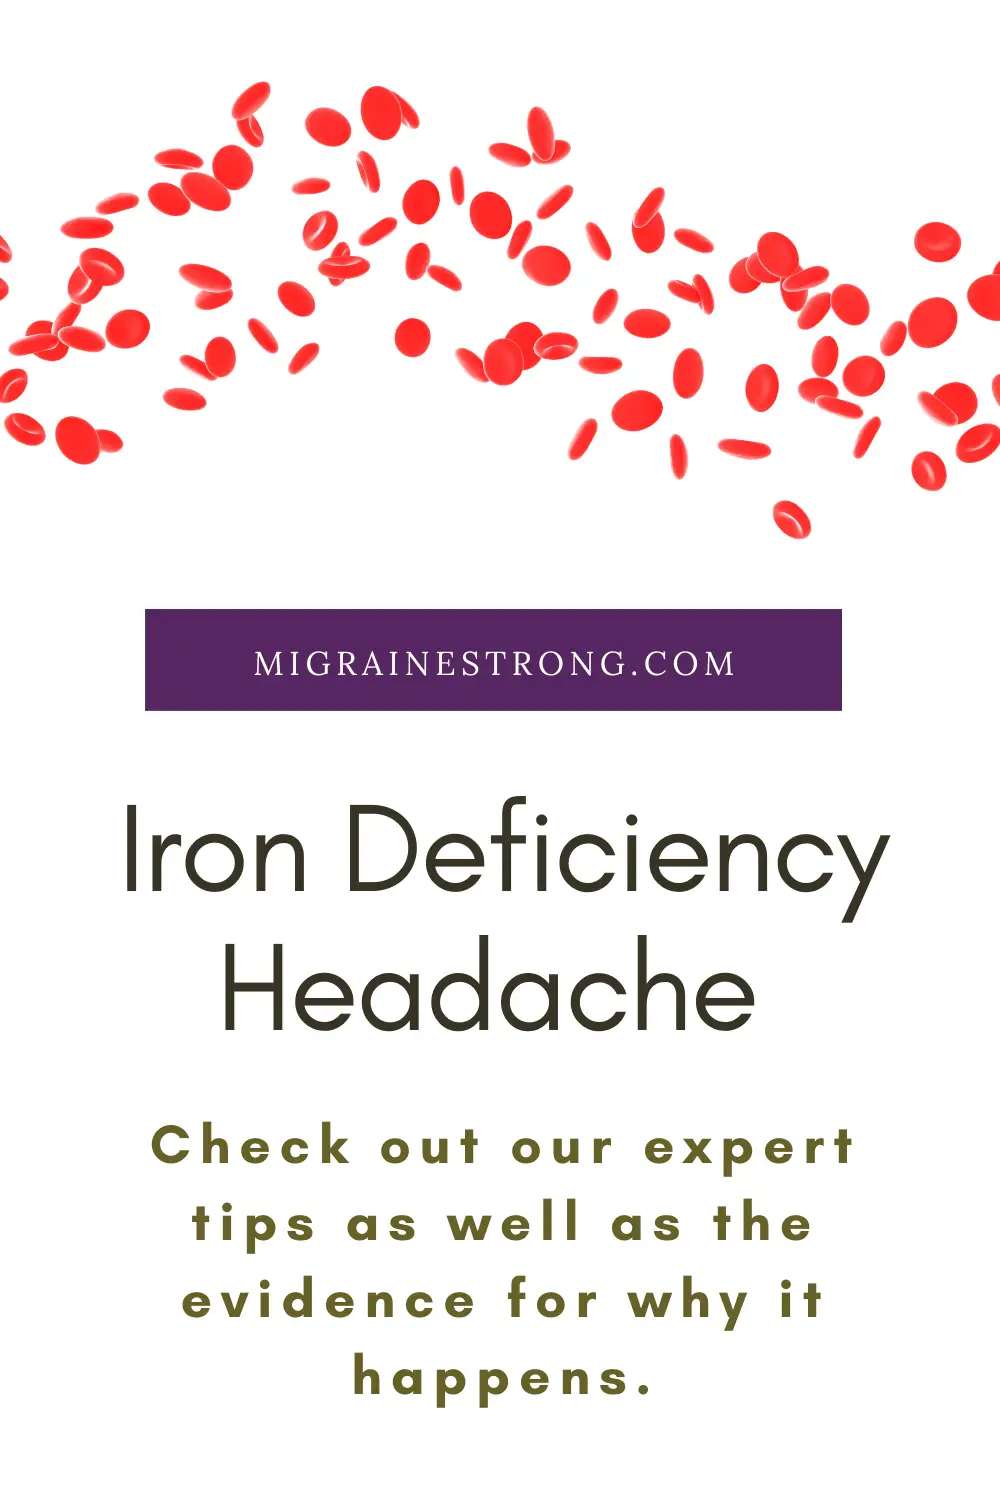 Iron Deficiency Anemia Headaches and Migraine- What You Need to Know